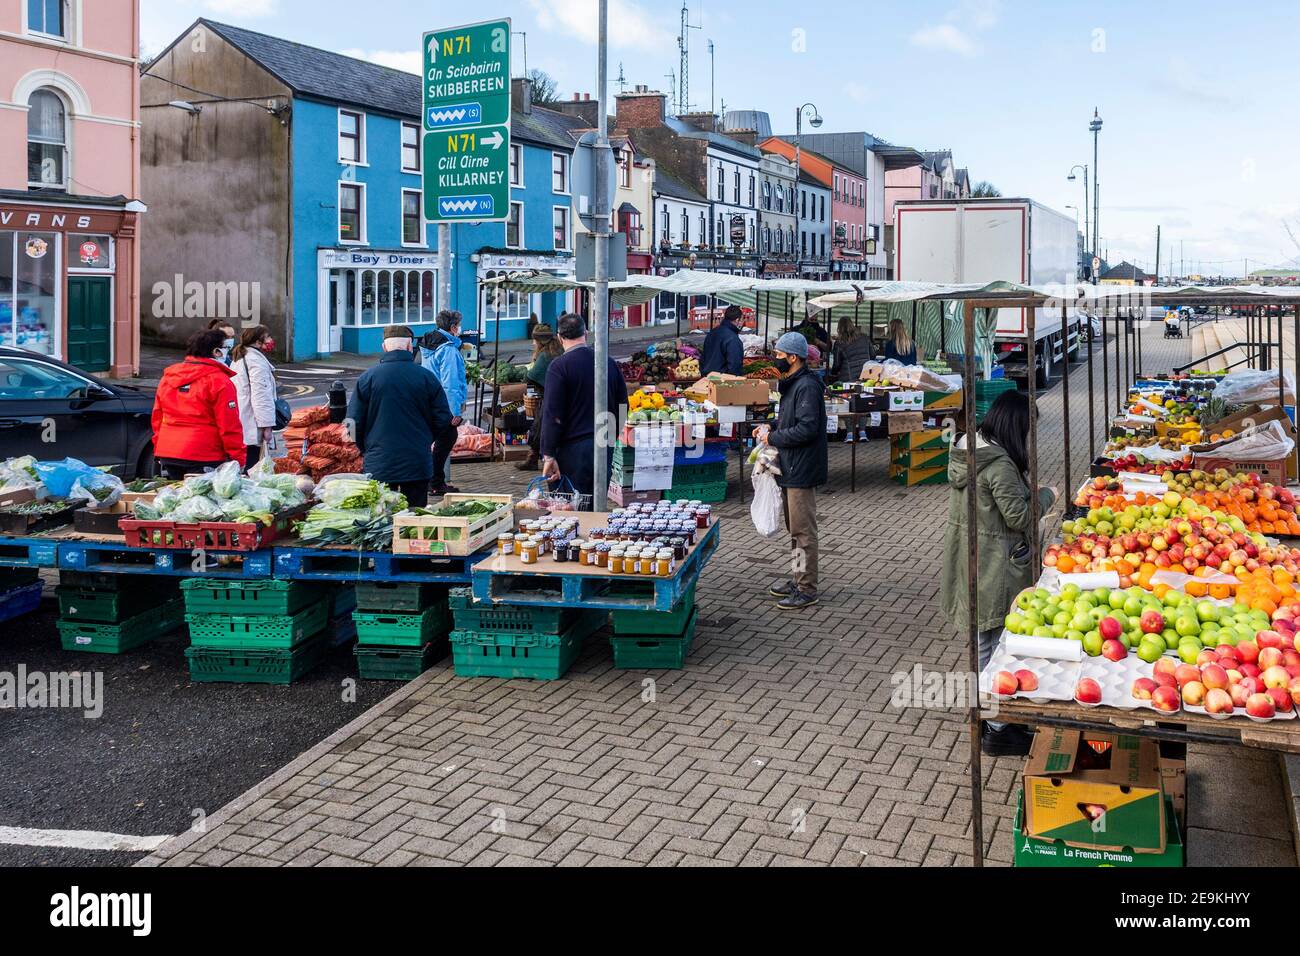 Bantry, West Cork, Ireland. 5th Feb, 2021. Despite level 5 lockdown restrictions, Bantry Friday Market was busy today with traders and customers alike. Although many people wore face masks, a good number didn't. Credit: AG News/Alamy Live News Stock Photo